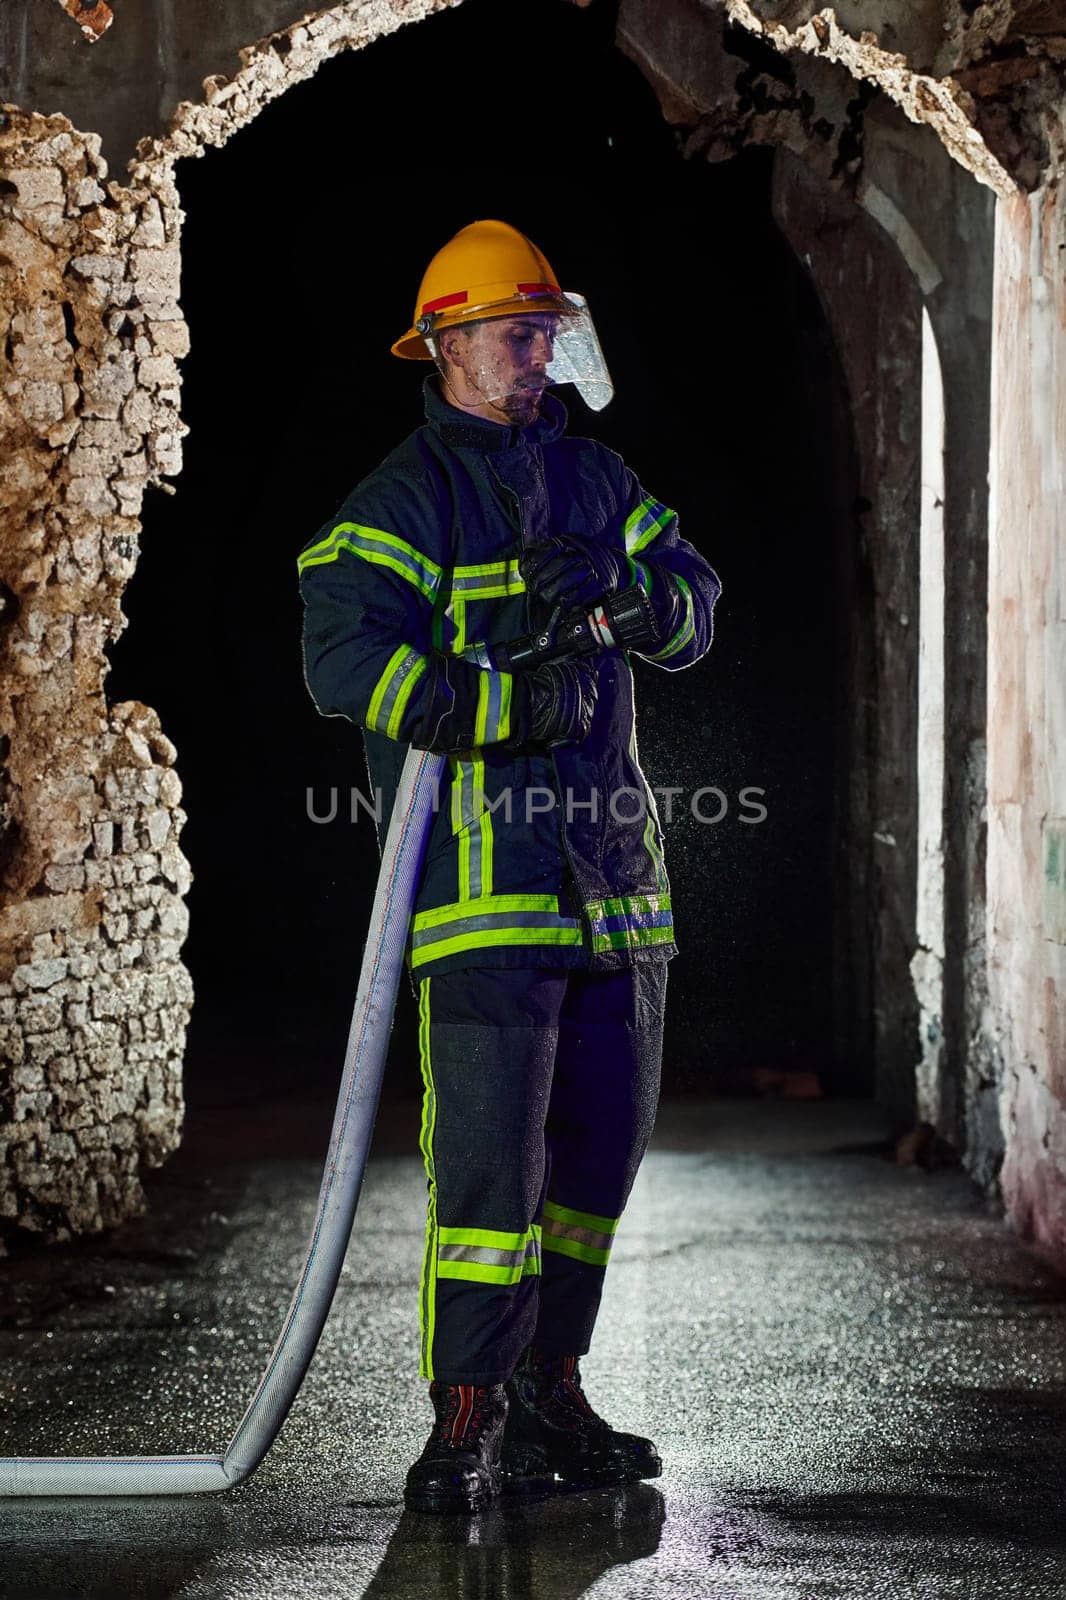 Firefighter using a water hose to eliminate a fire hazard. Team of female and male firemen in dangerous rescue mission